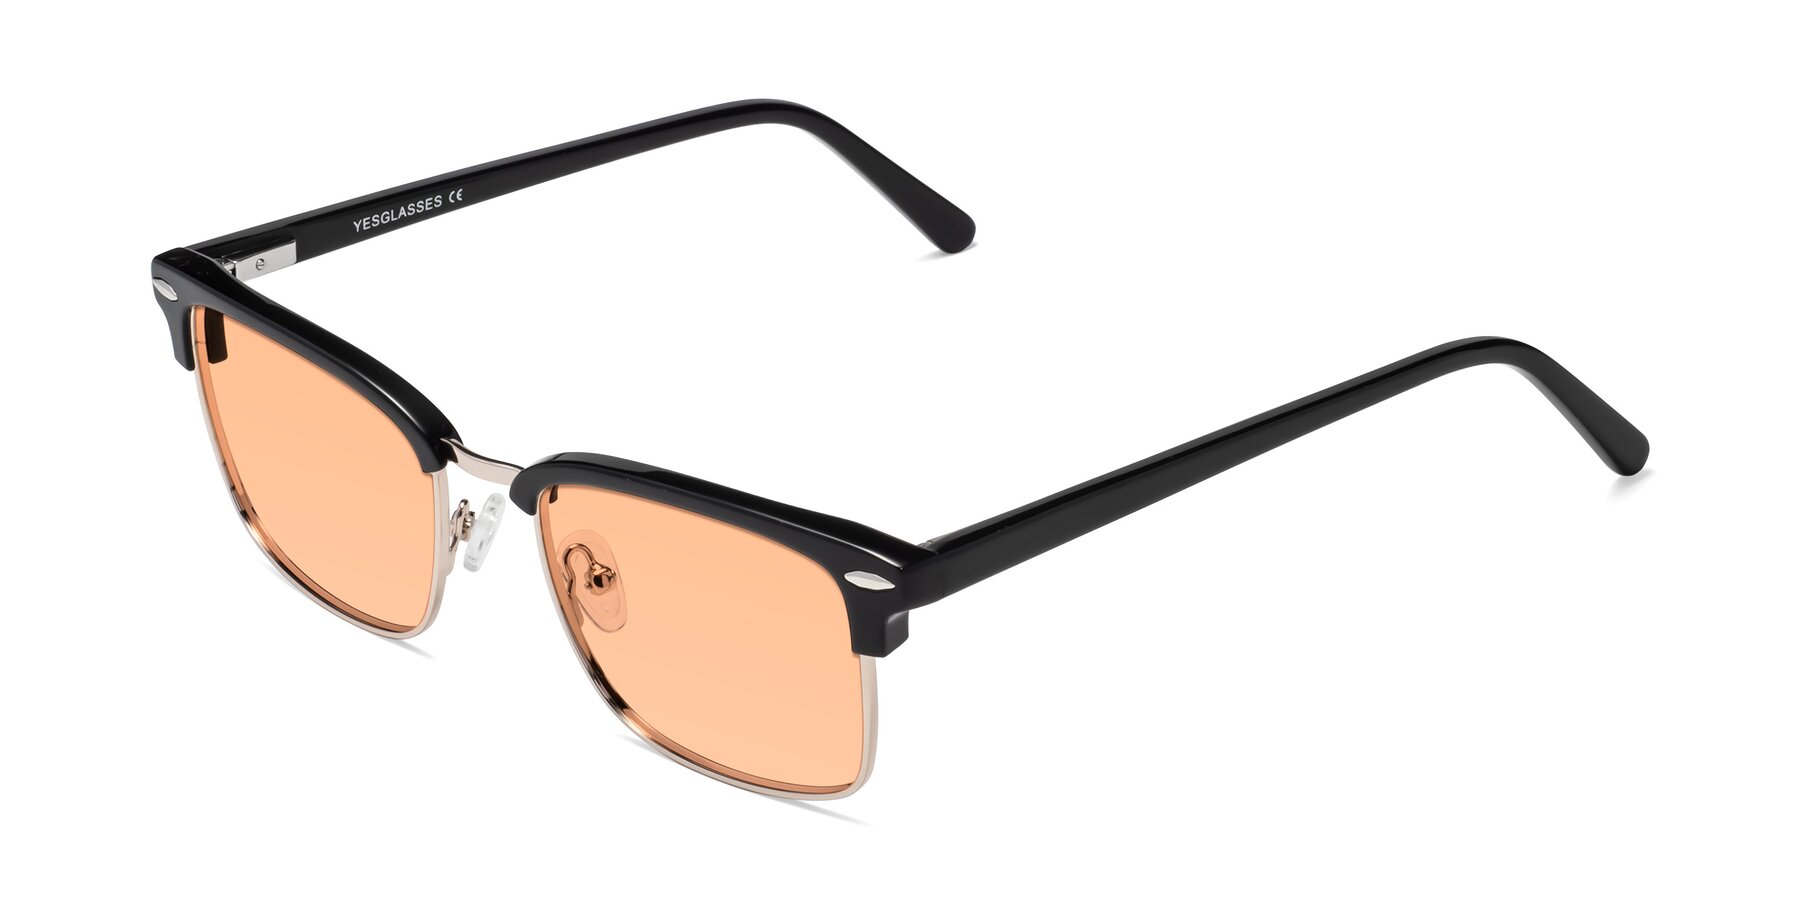 Angle of 17464 in Black-Gold with Light Orange Tinted Lenses